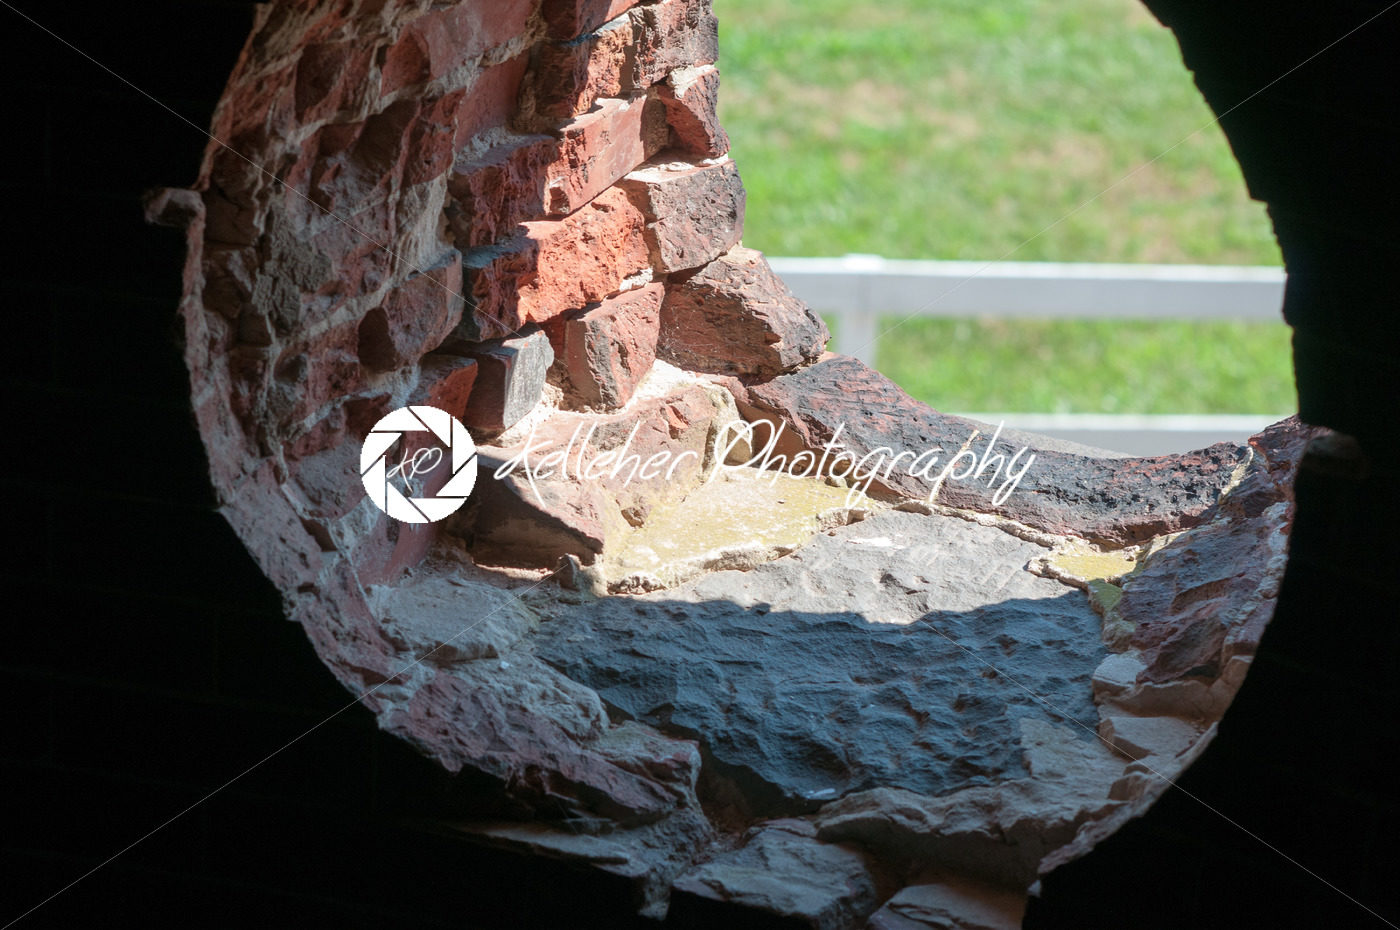 FORT DELAWARE, DELAWARE CITY, DE – AUGUST 1: Fort Delaware State Park, Historic Union Civil War Fortress that housed Confederate Prisoners on August 1, 2015 - Kelleher Photography Store